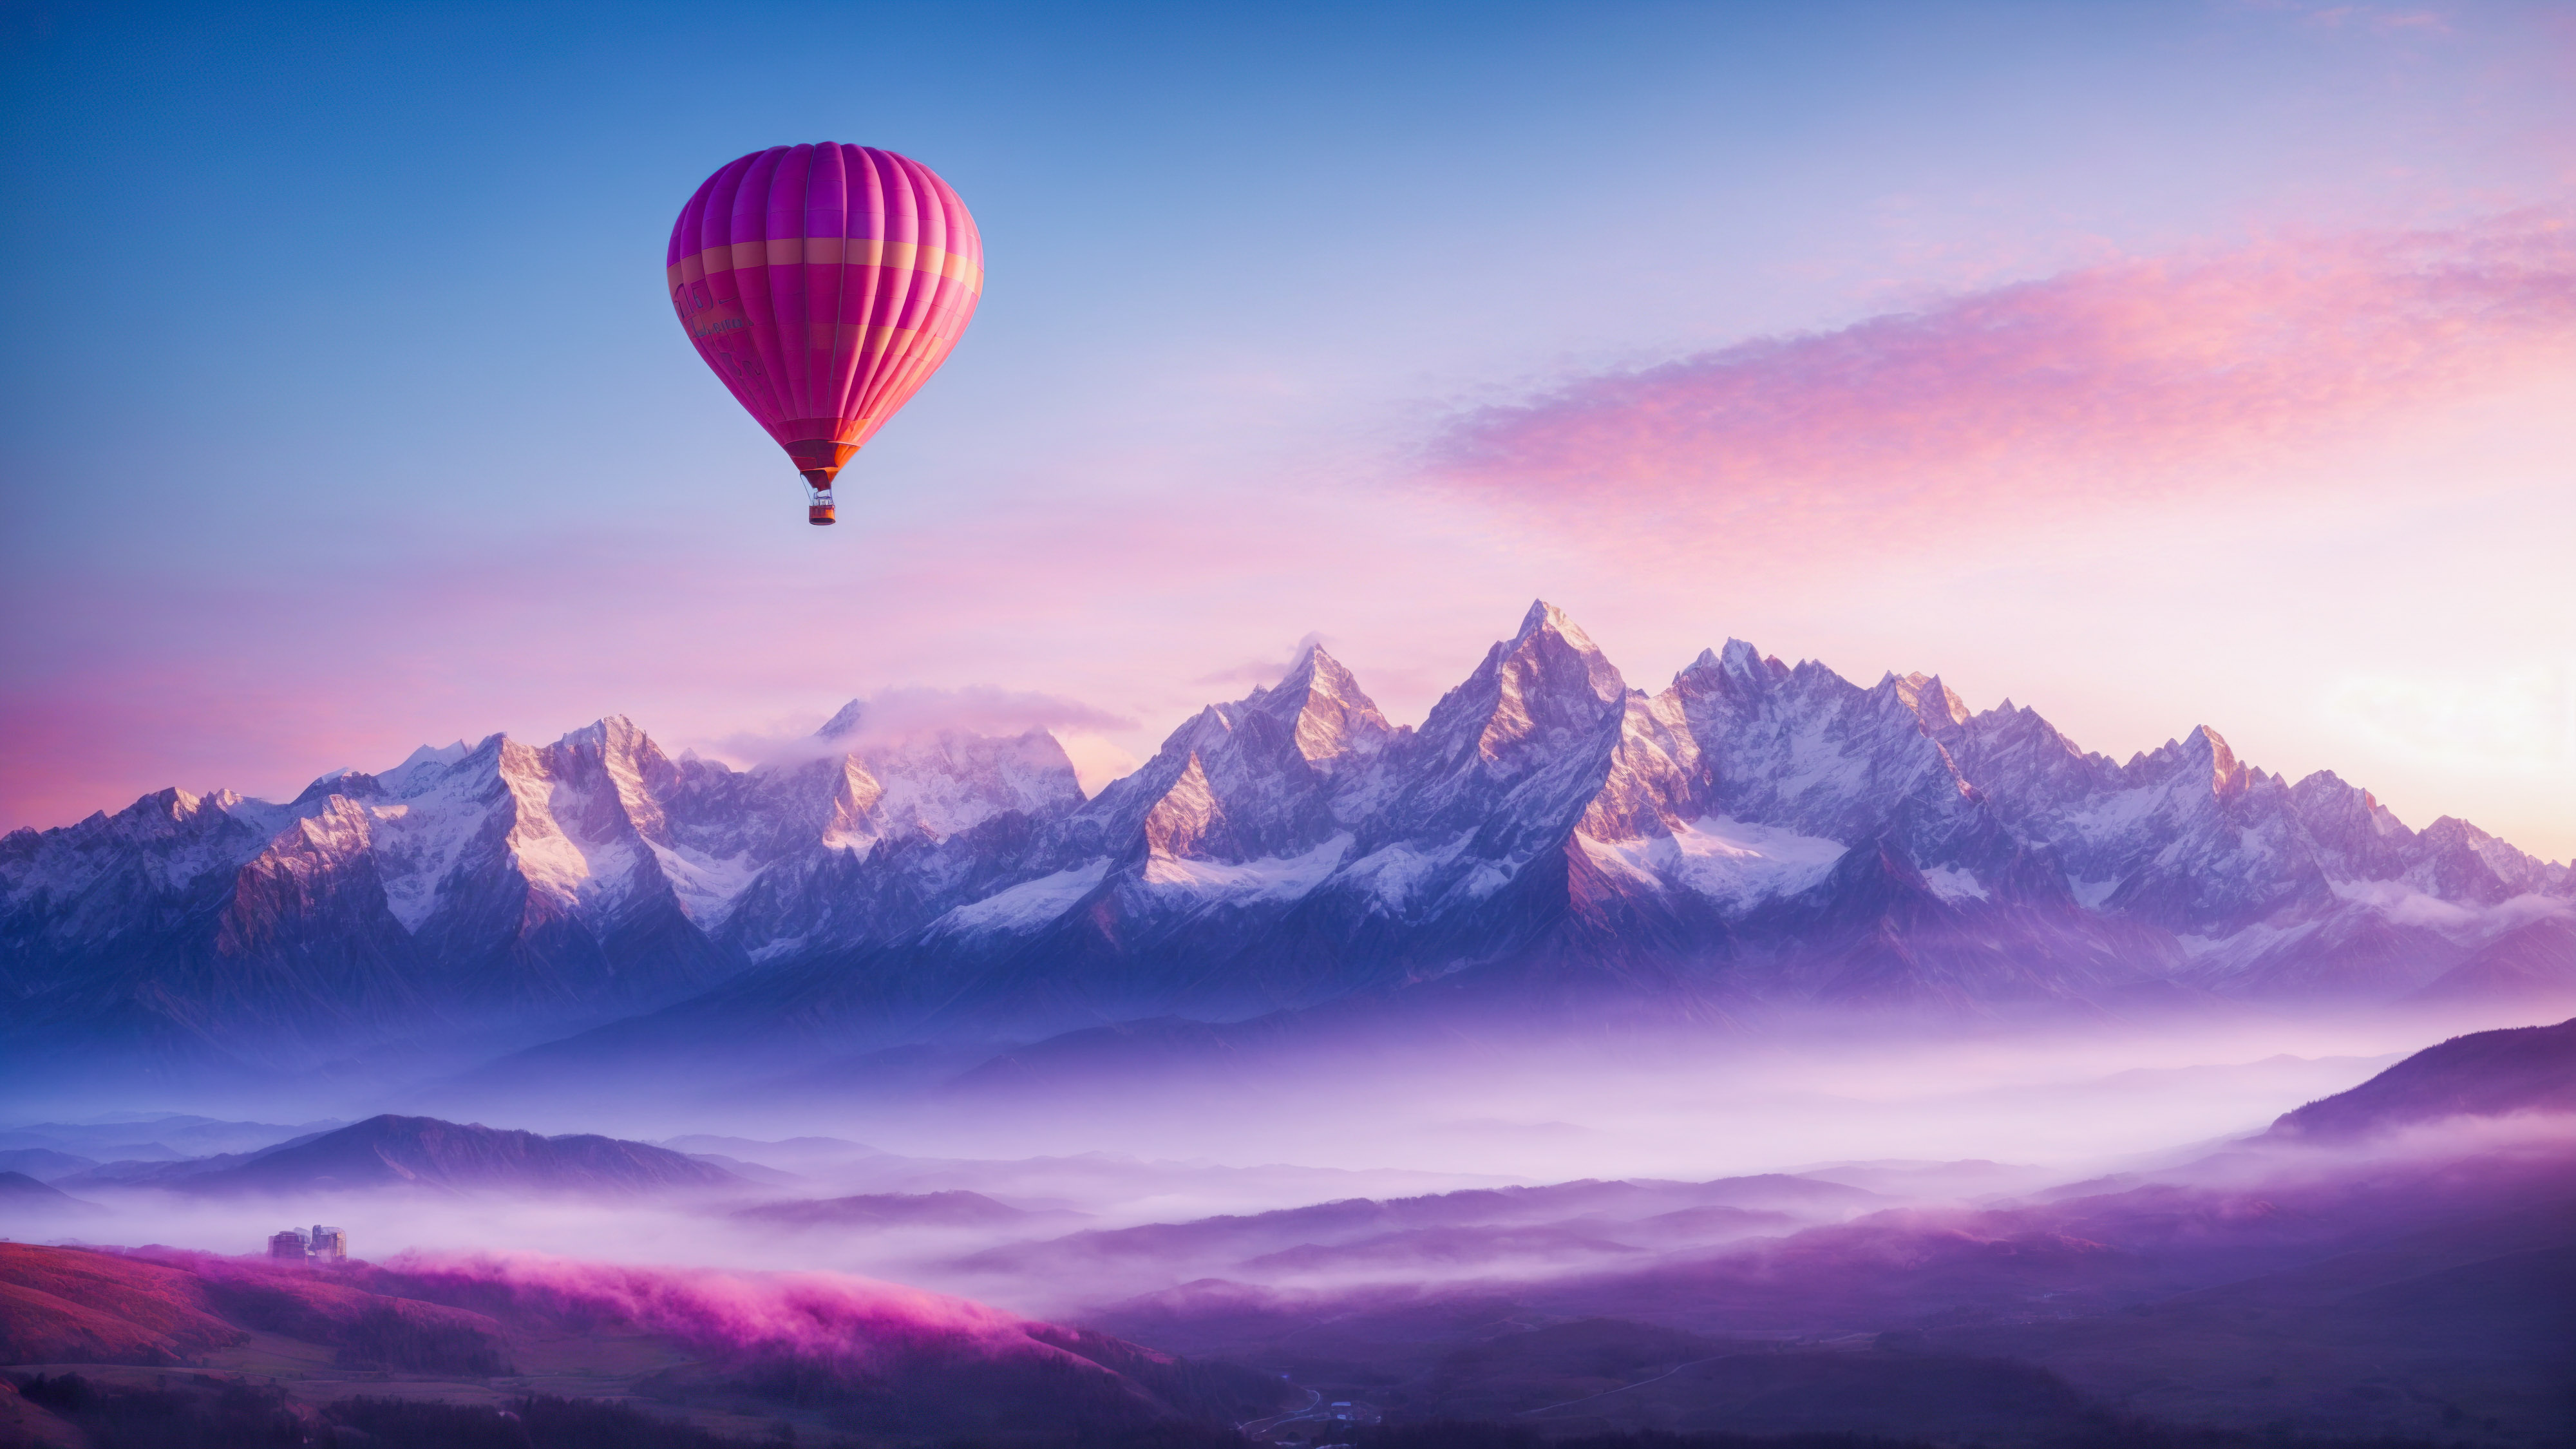 Witness the breathtaking beauty of a sunrise over the mountains, with pink and blue hues and a hot air balloon flying in the sky, with our aesthetic mountain wallpaper.